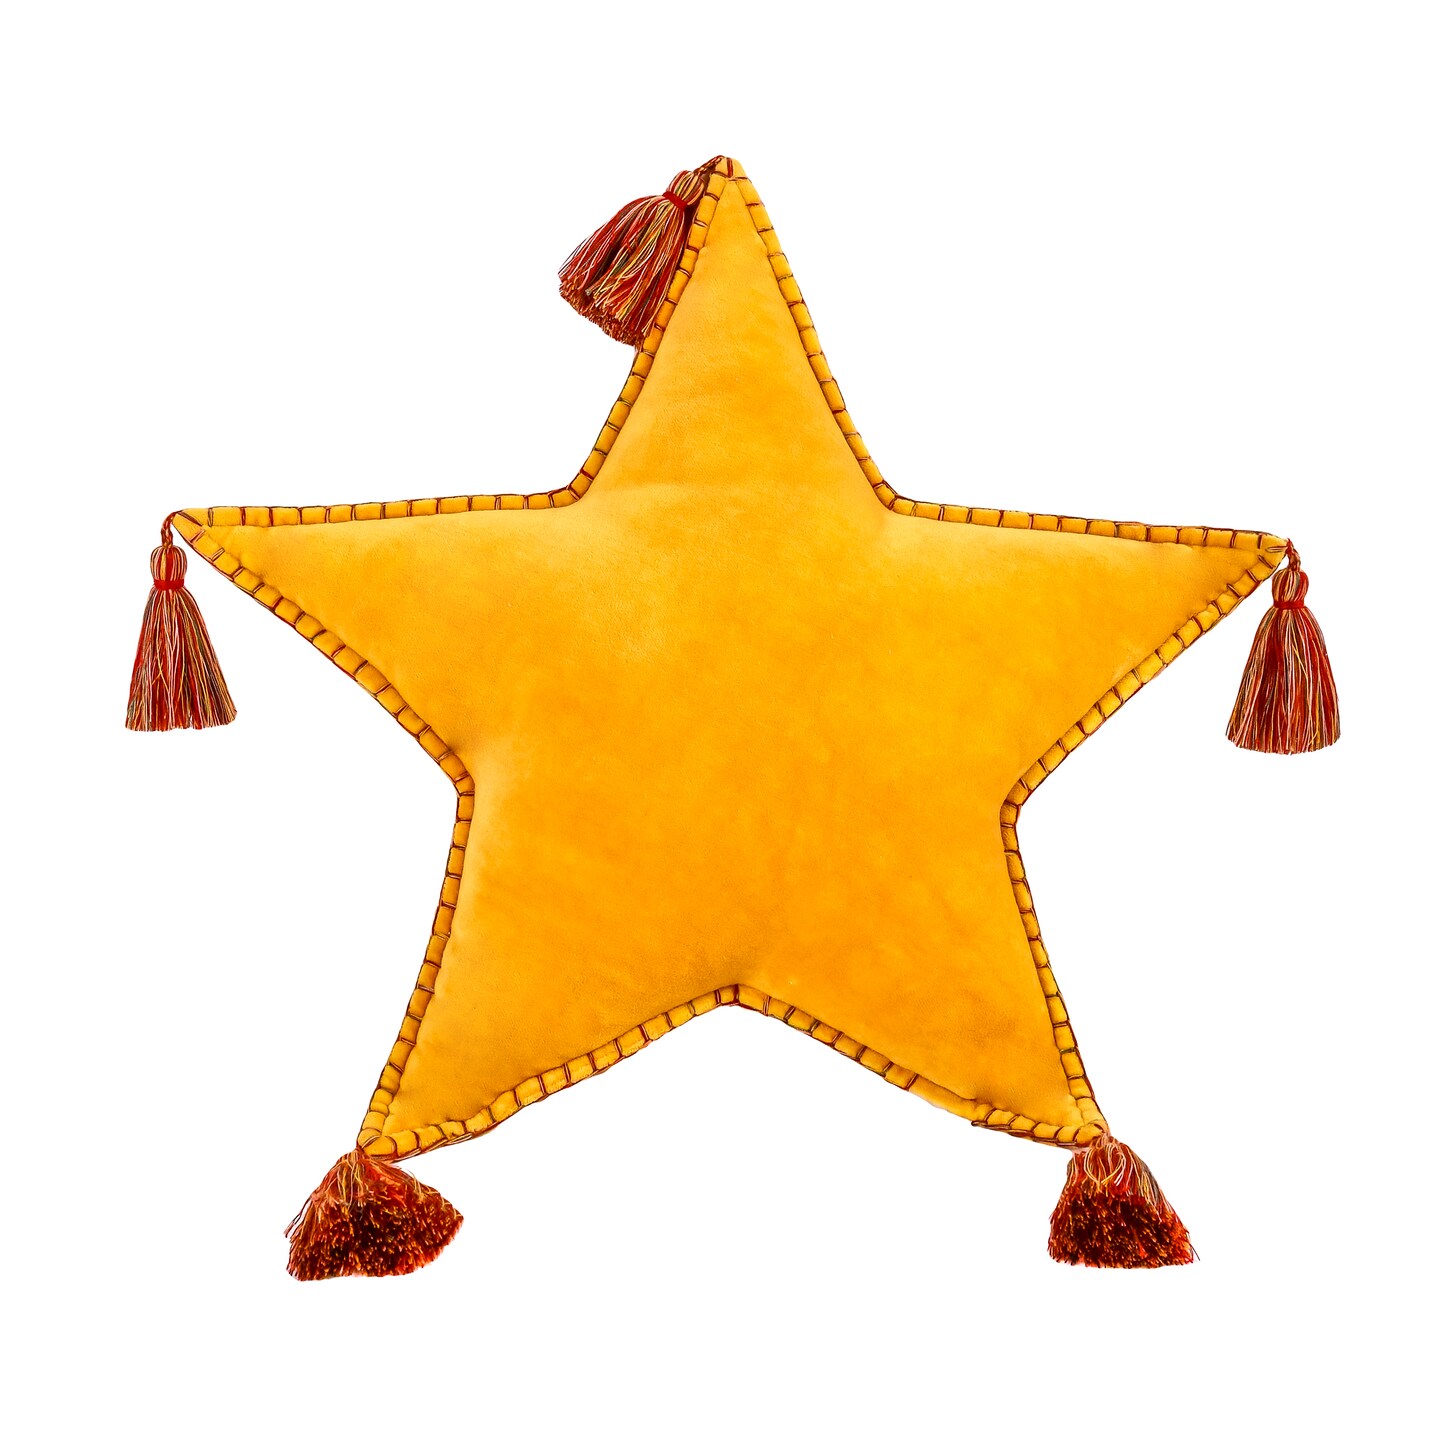 HGTV Home Collection Star Shaped Pillow With Tassels, Yellow, 16in